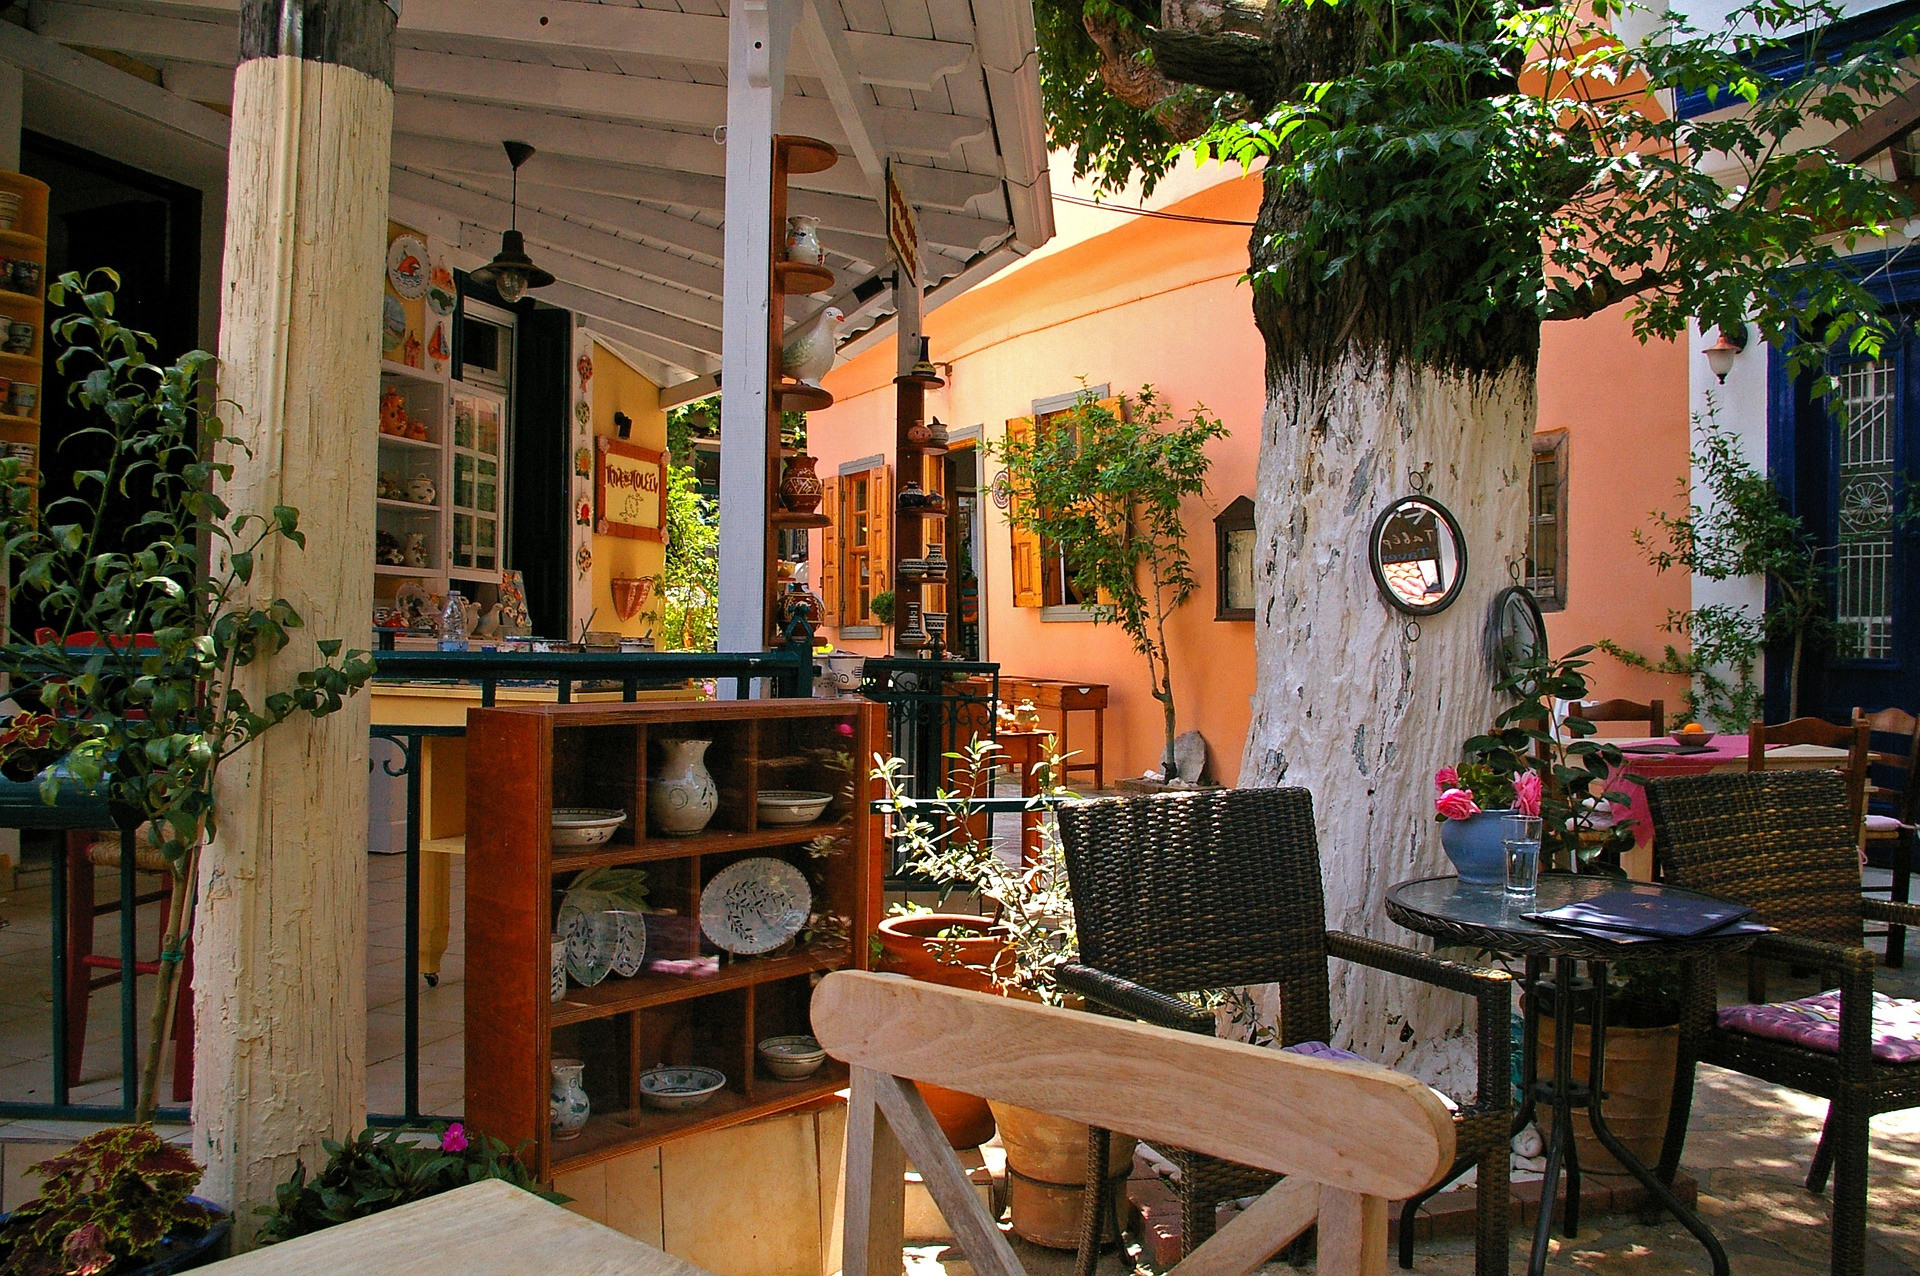 Greek Coffee Culture - Greek Coffee Shops And Traditions